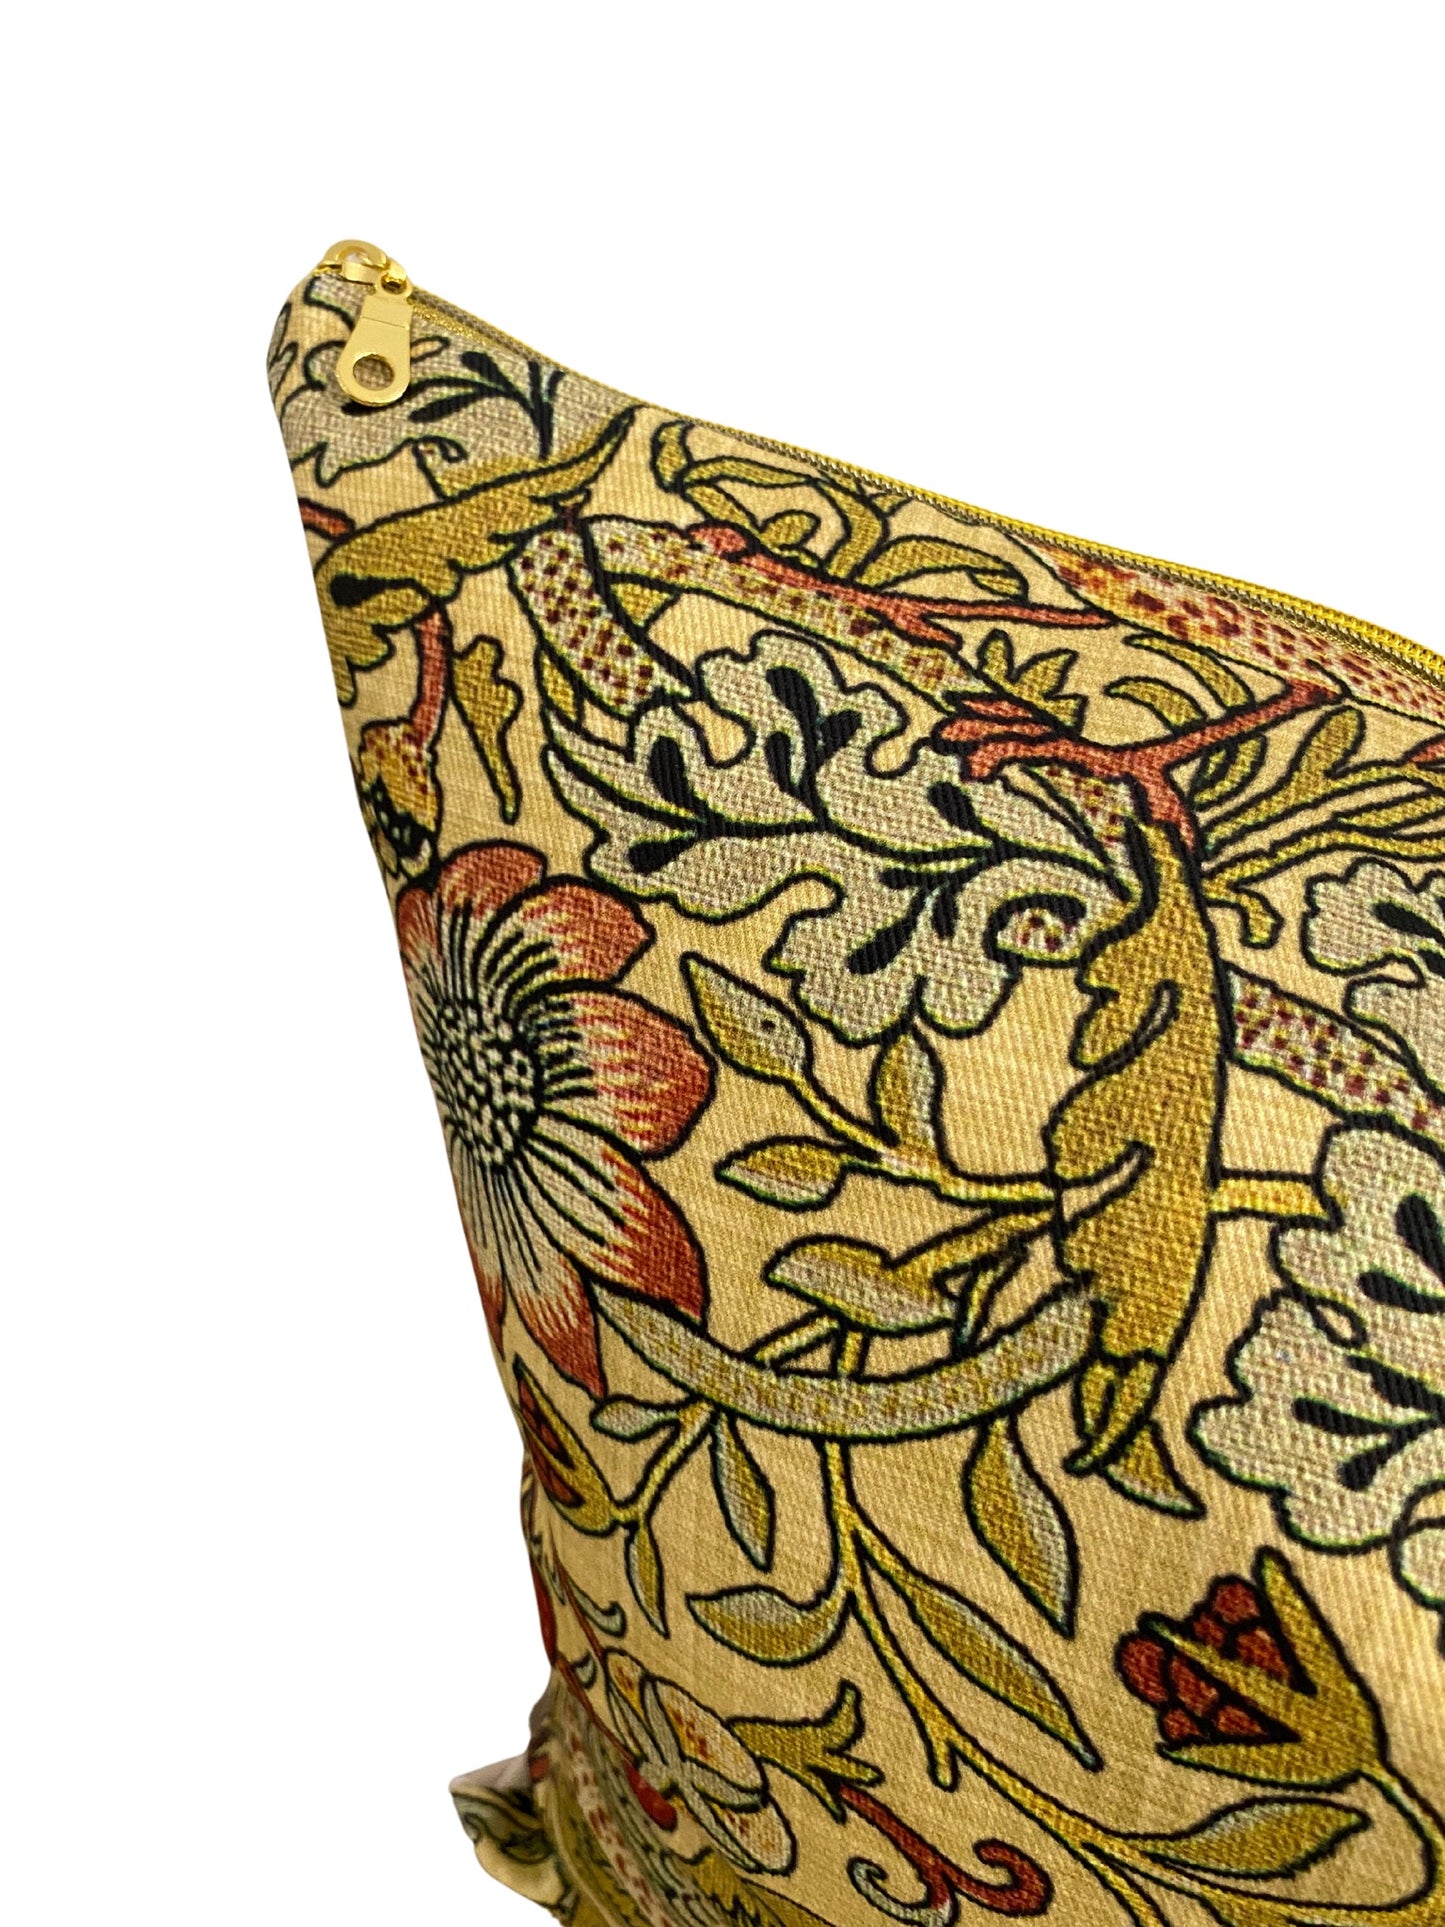 William Morris Strawberry Thieves Pillow Cover - Gold